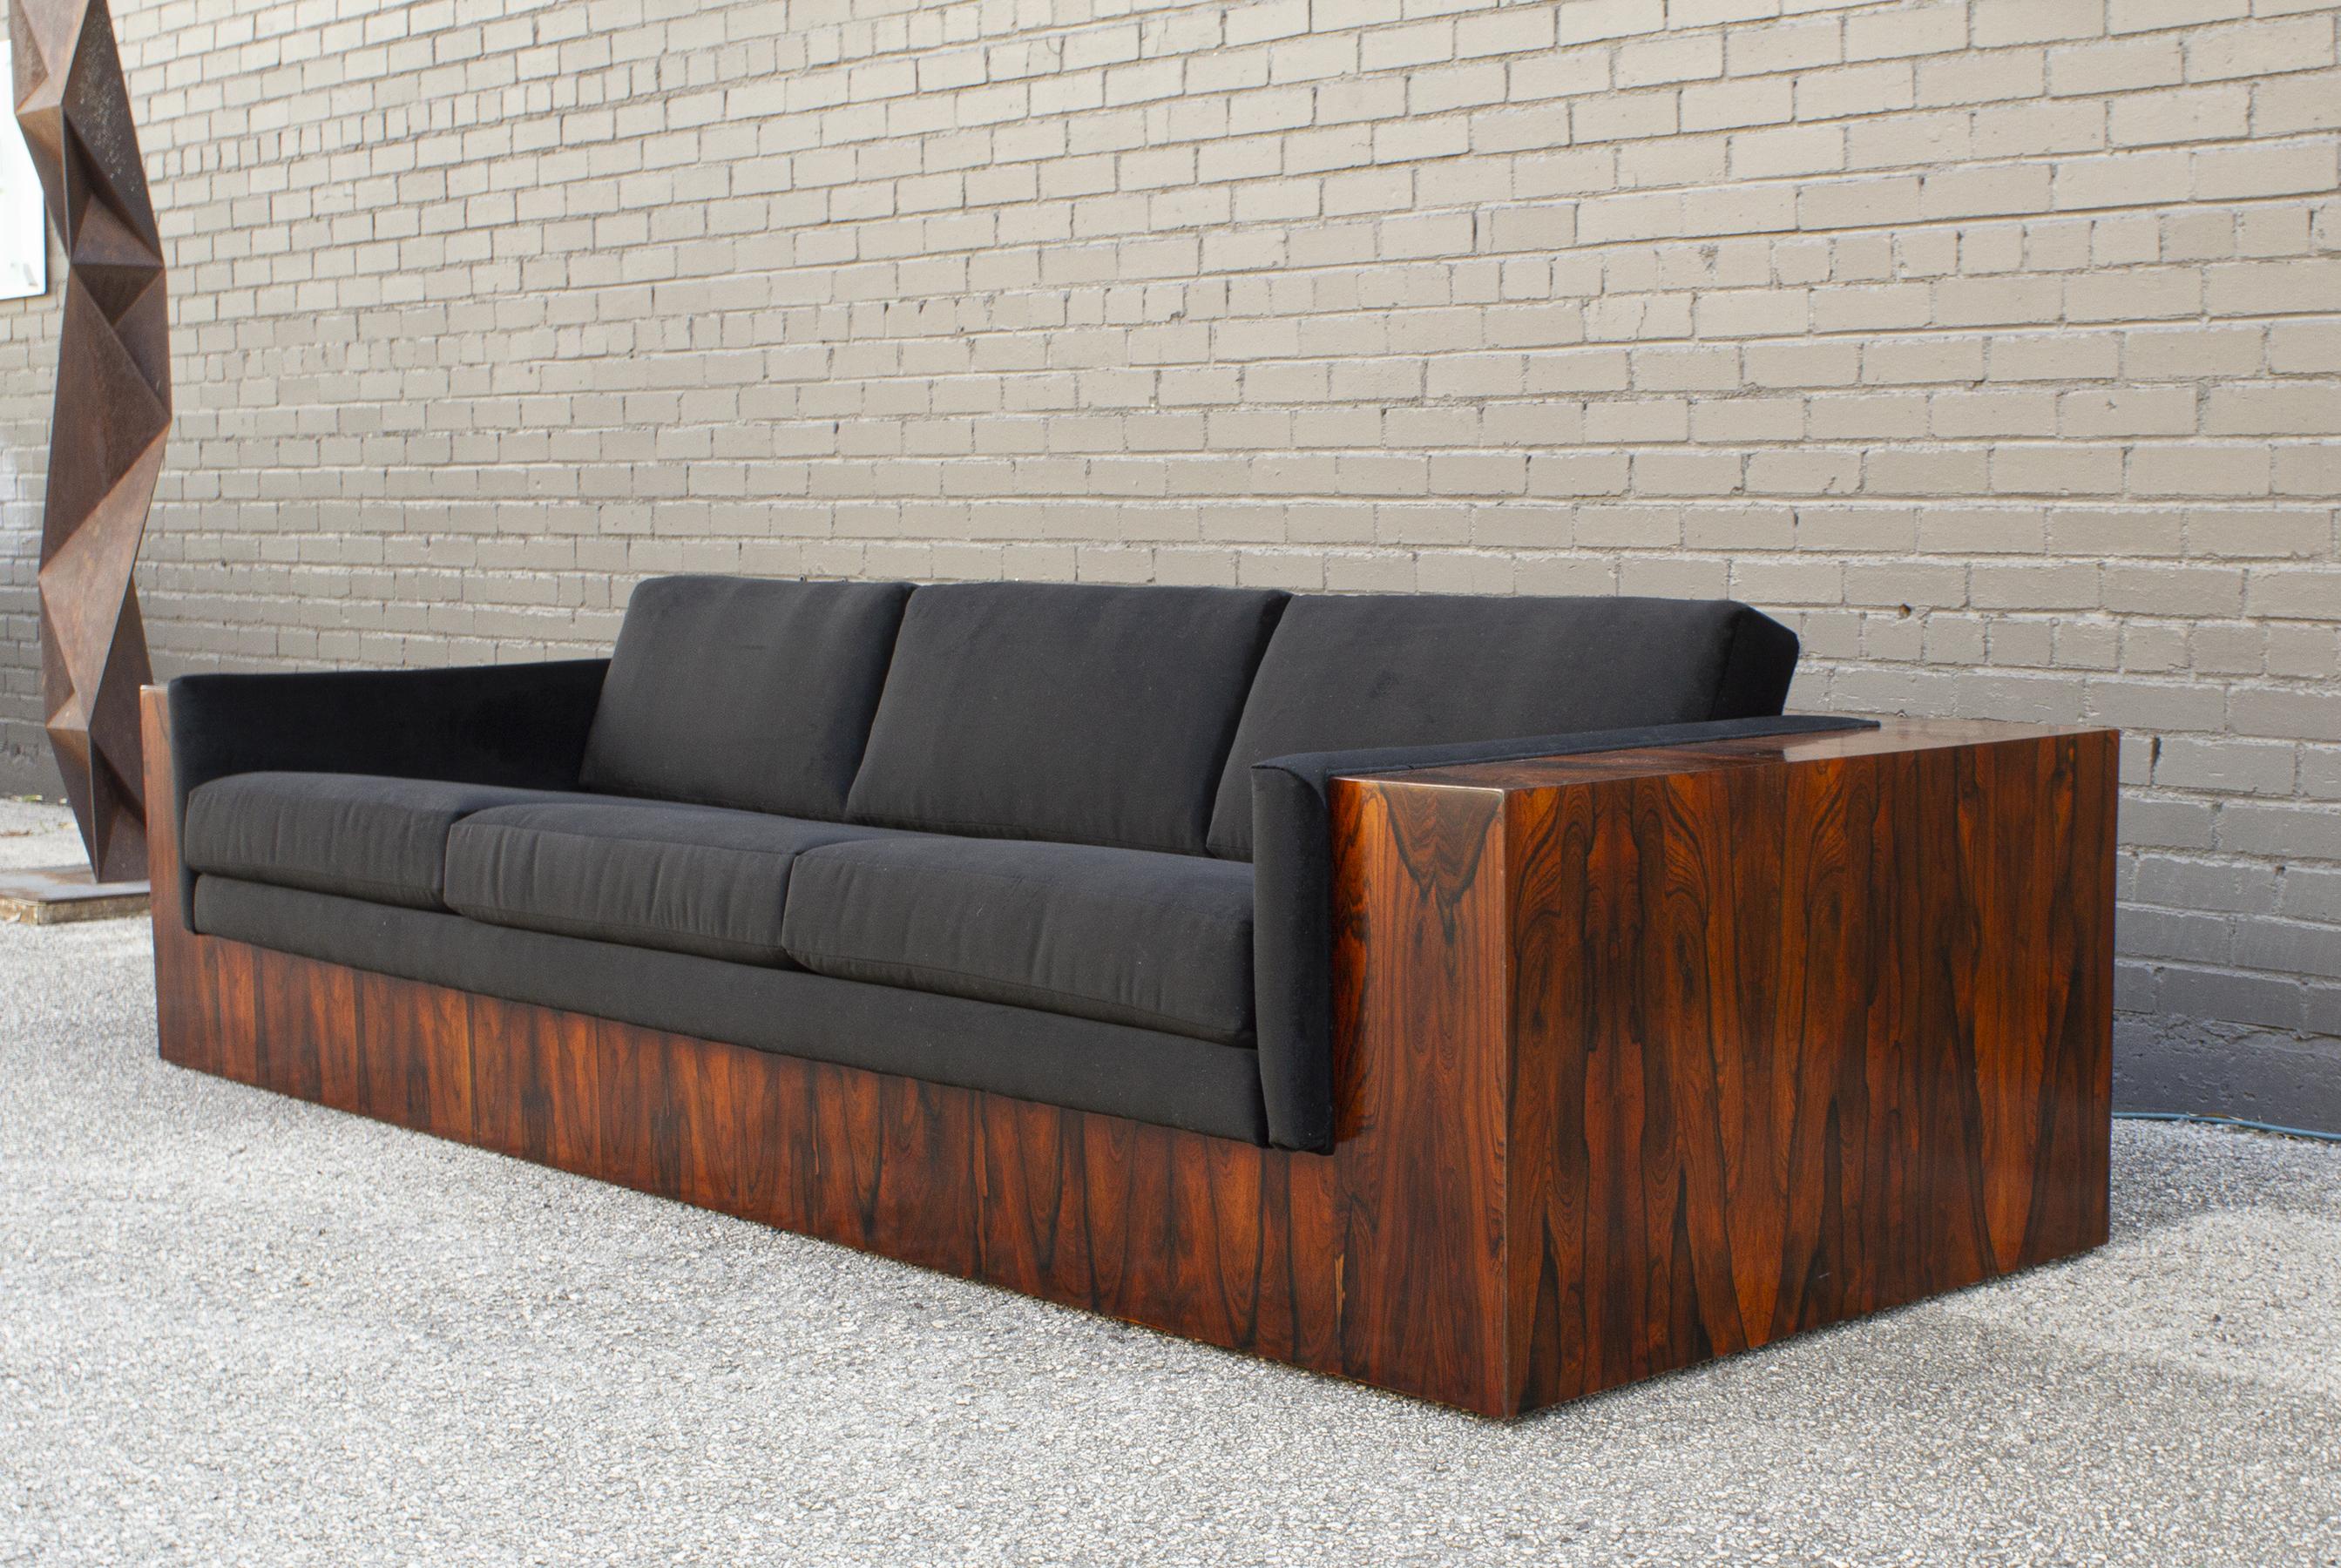 This Milo Baughman-designed case sofa is constructed of highly figured, book-matched Brazilian rosewood and was produced by Thayer Coggin in the early 1970s. The entire case was professionally finished in semi-gloss lacquer that still allows for the